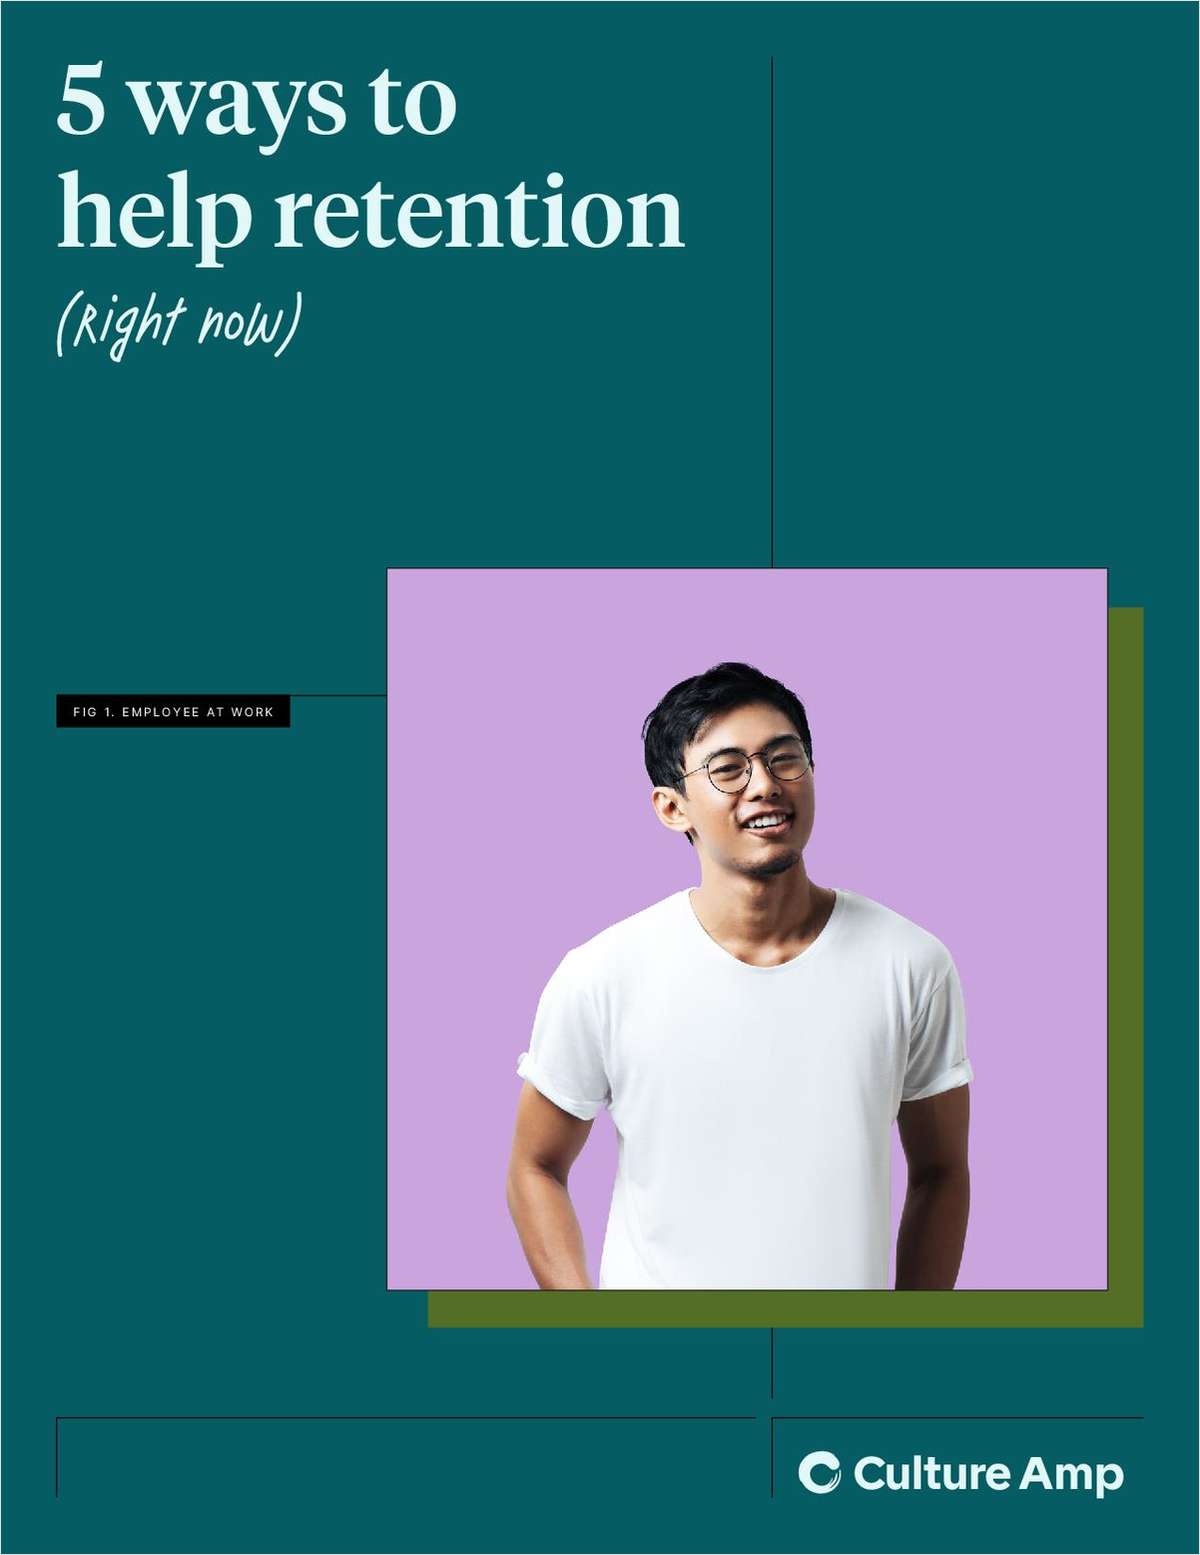 5 Ways to Help Retention Right Now